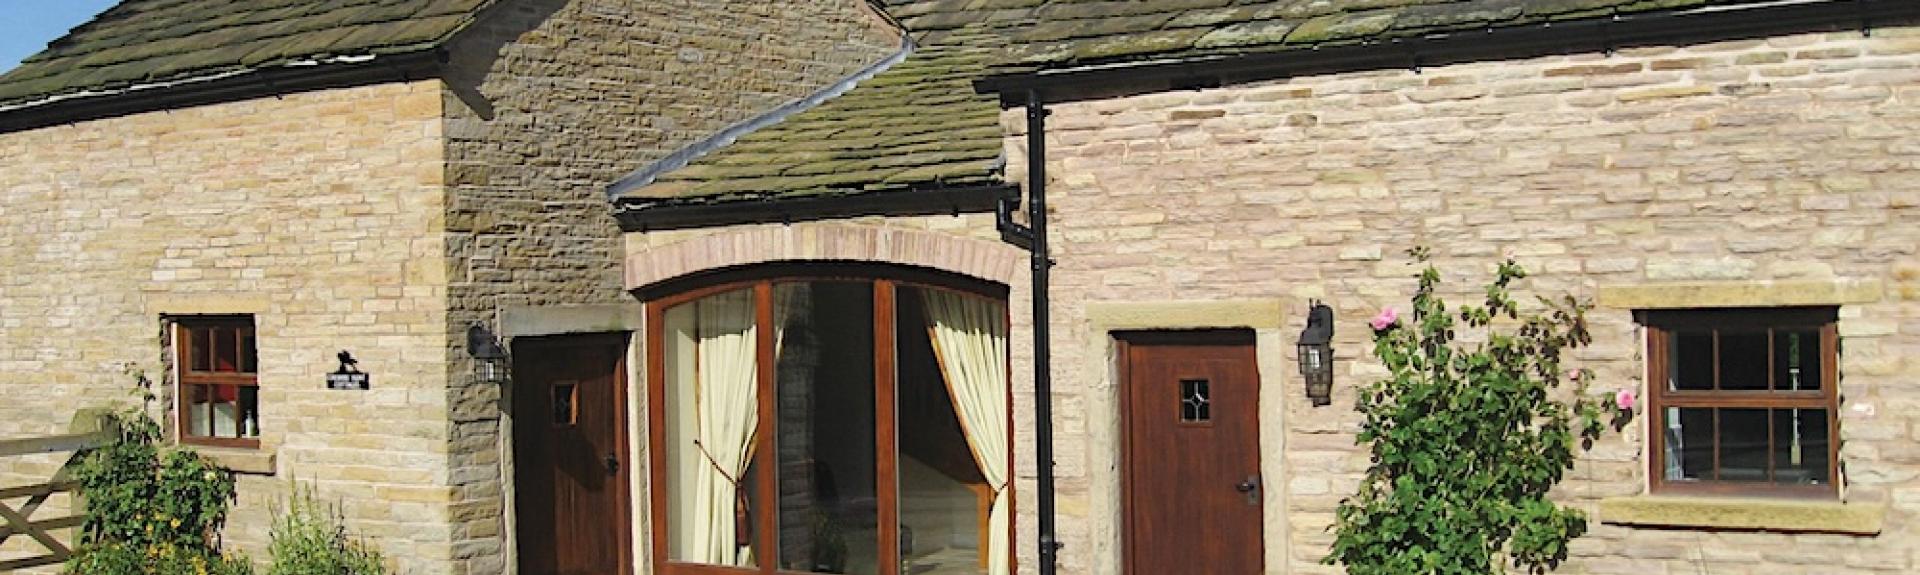 Exterior of a single-storey, stone-built, Cheshire holiday cottage.